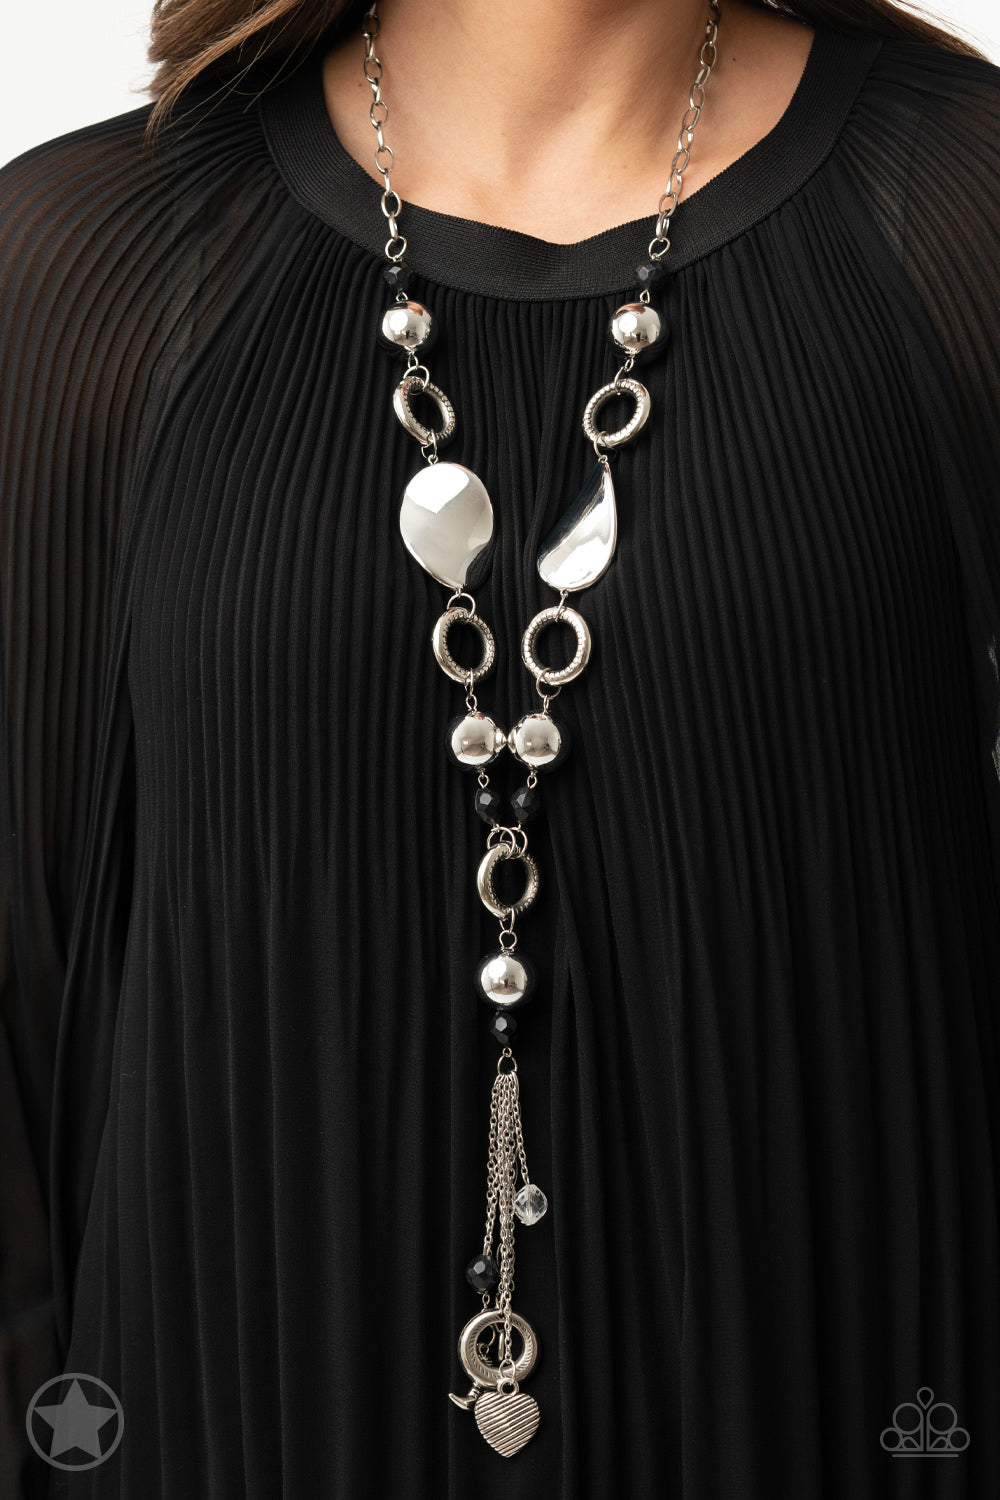 "Total Eclipse of the Heart" - Black #2021 - Paparazzi Accessories